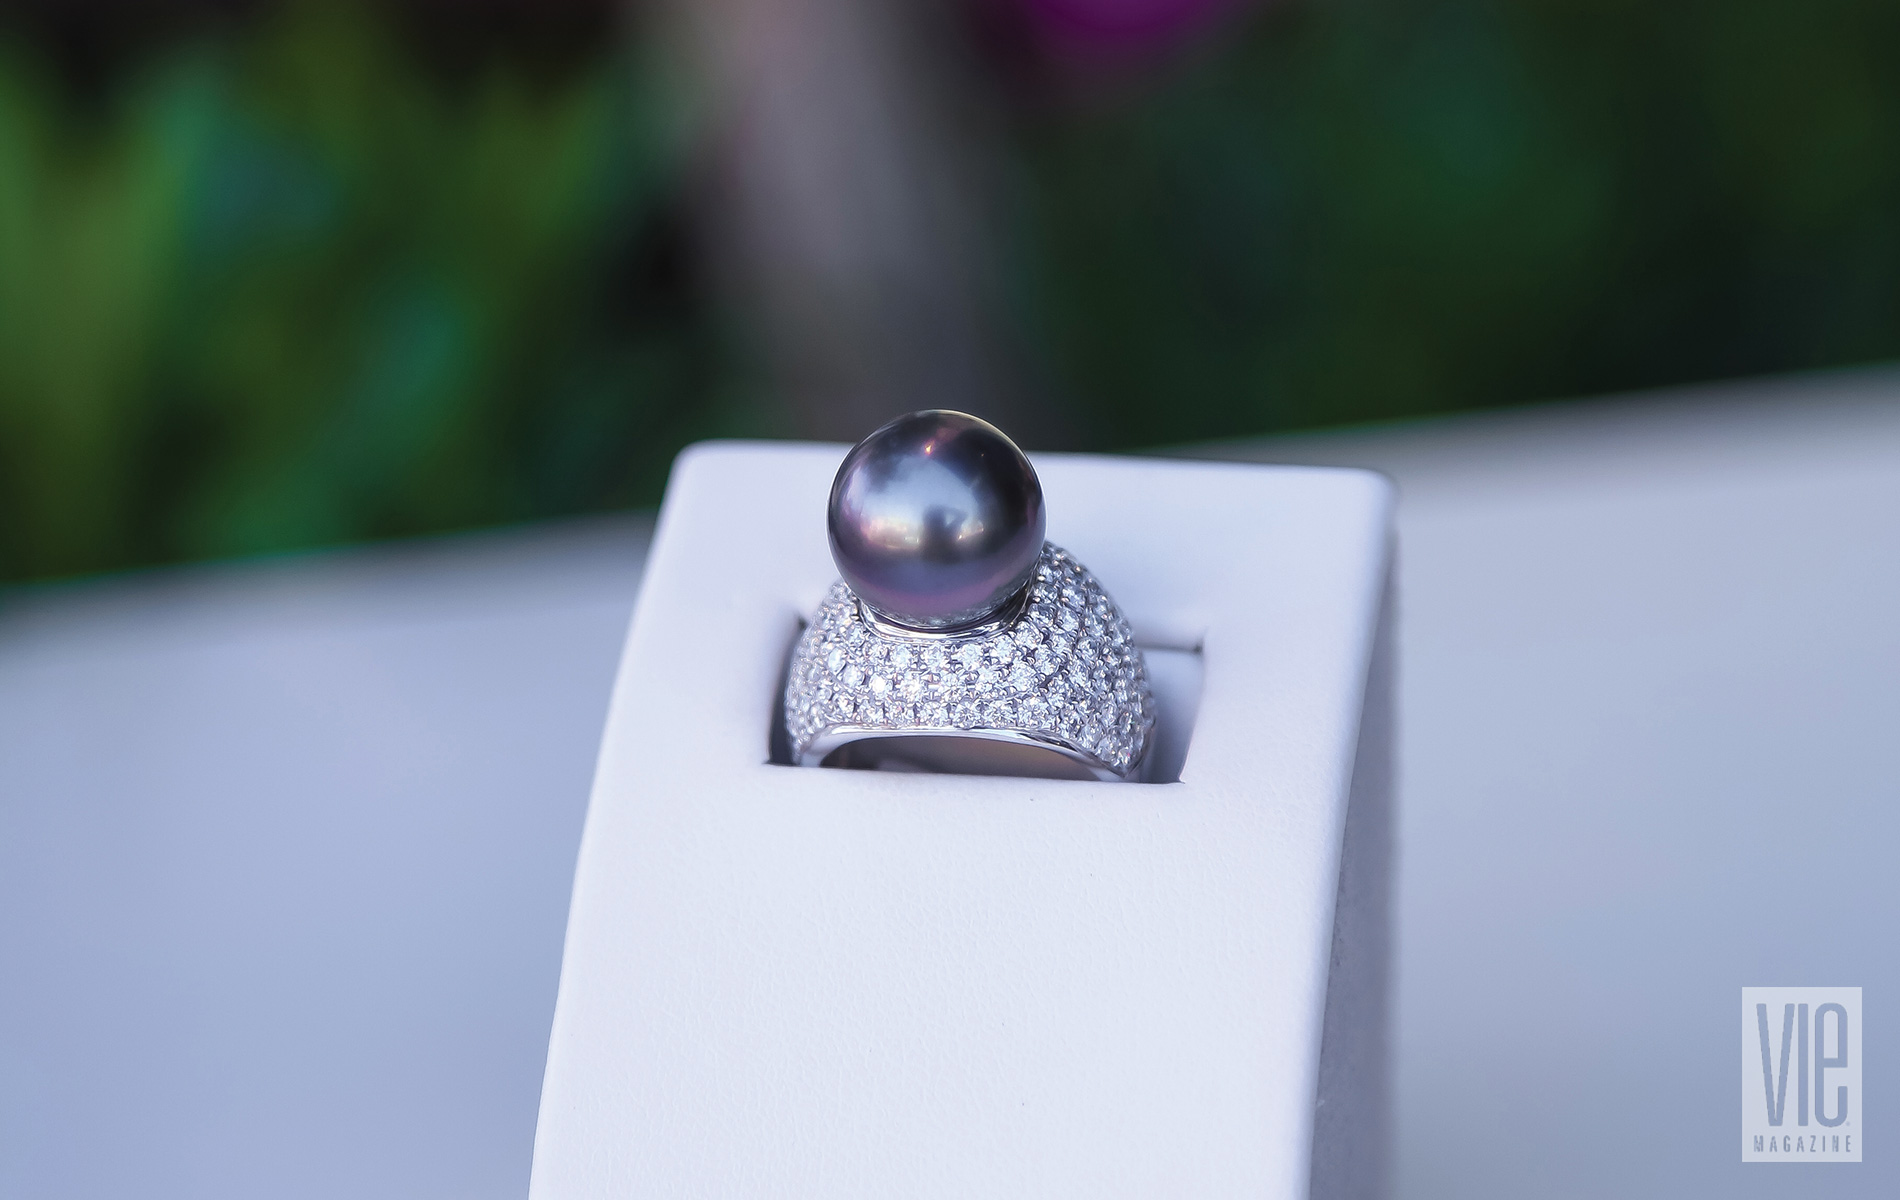 A Big Black Pearl Cocktail Ring Surrounded By A Setting Of Pave Diamonds Resting On A Ring Case